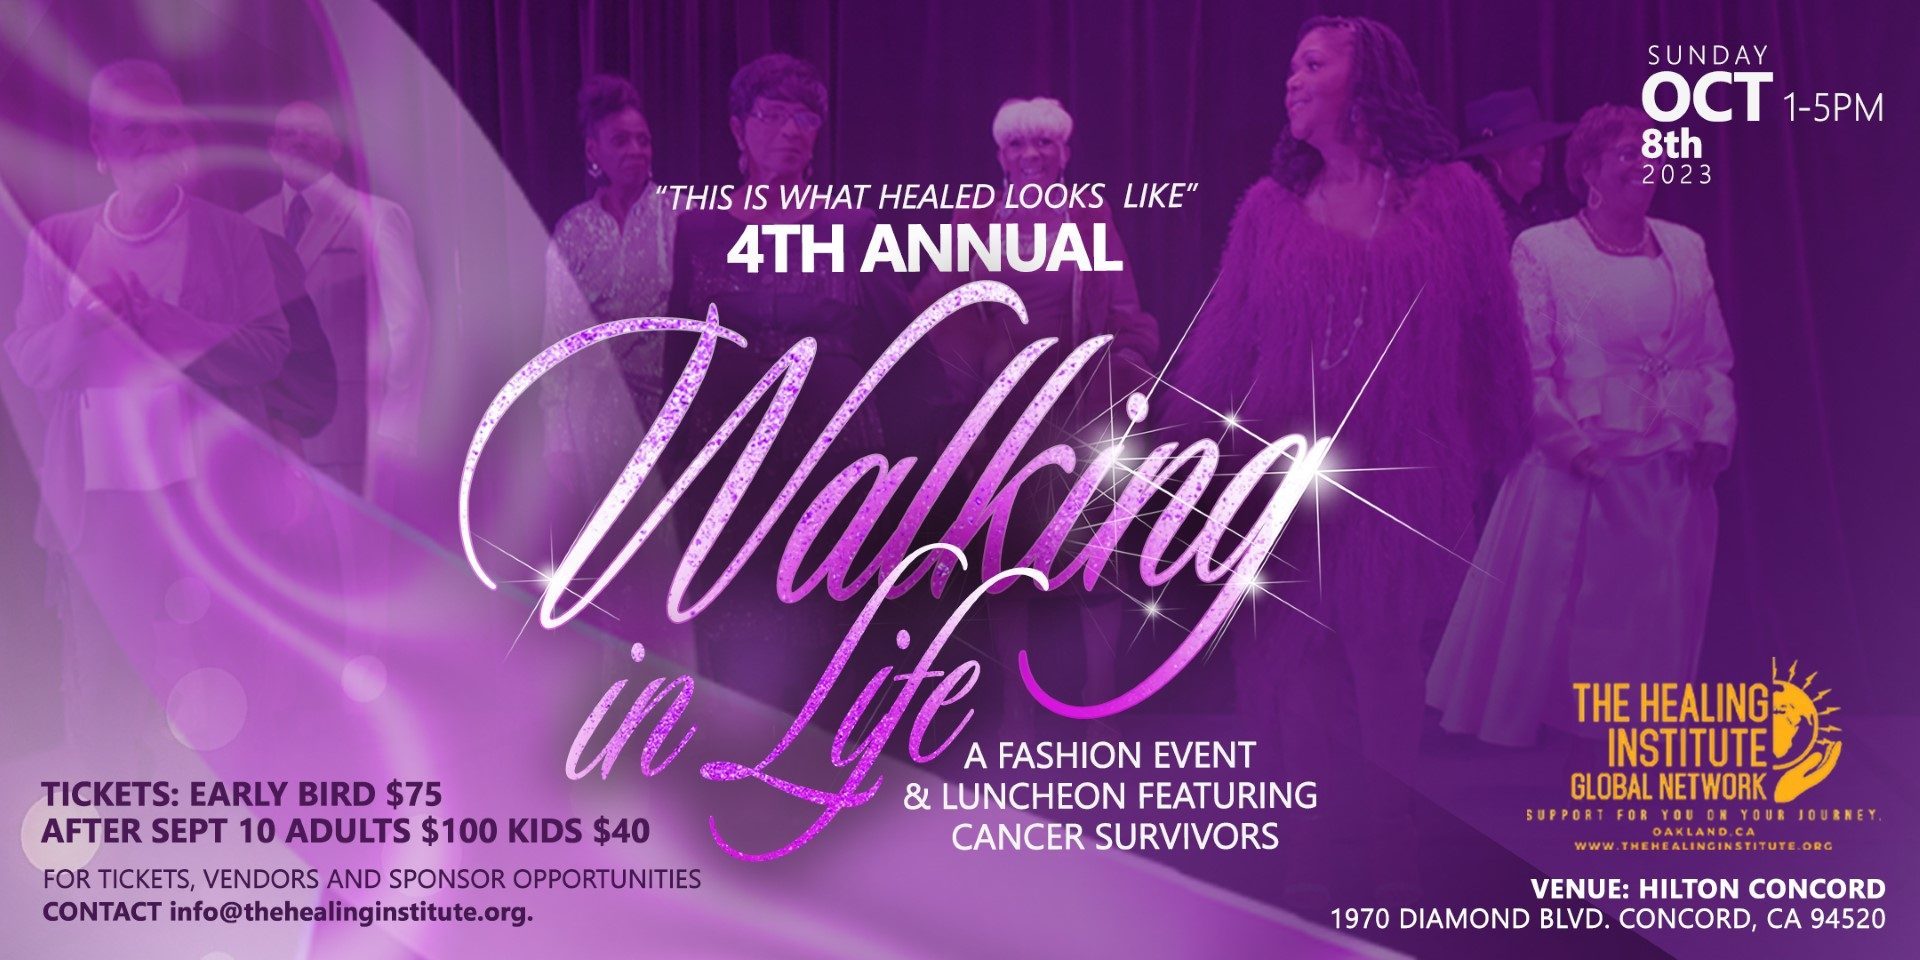 Walking in Life Fashion Event & Luncheon featuring Cancer Survivors!